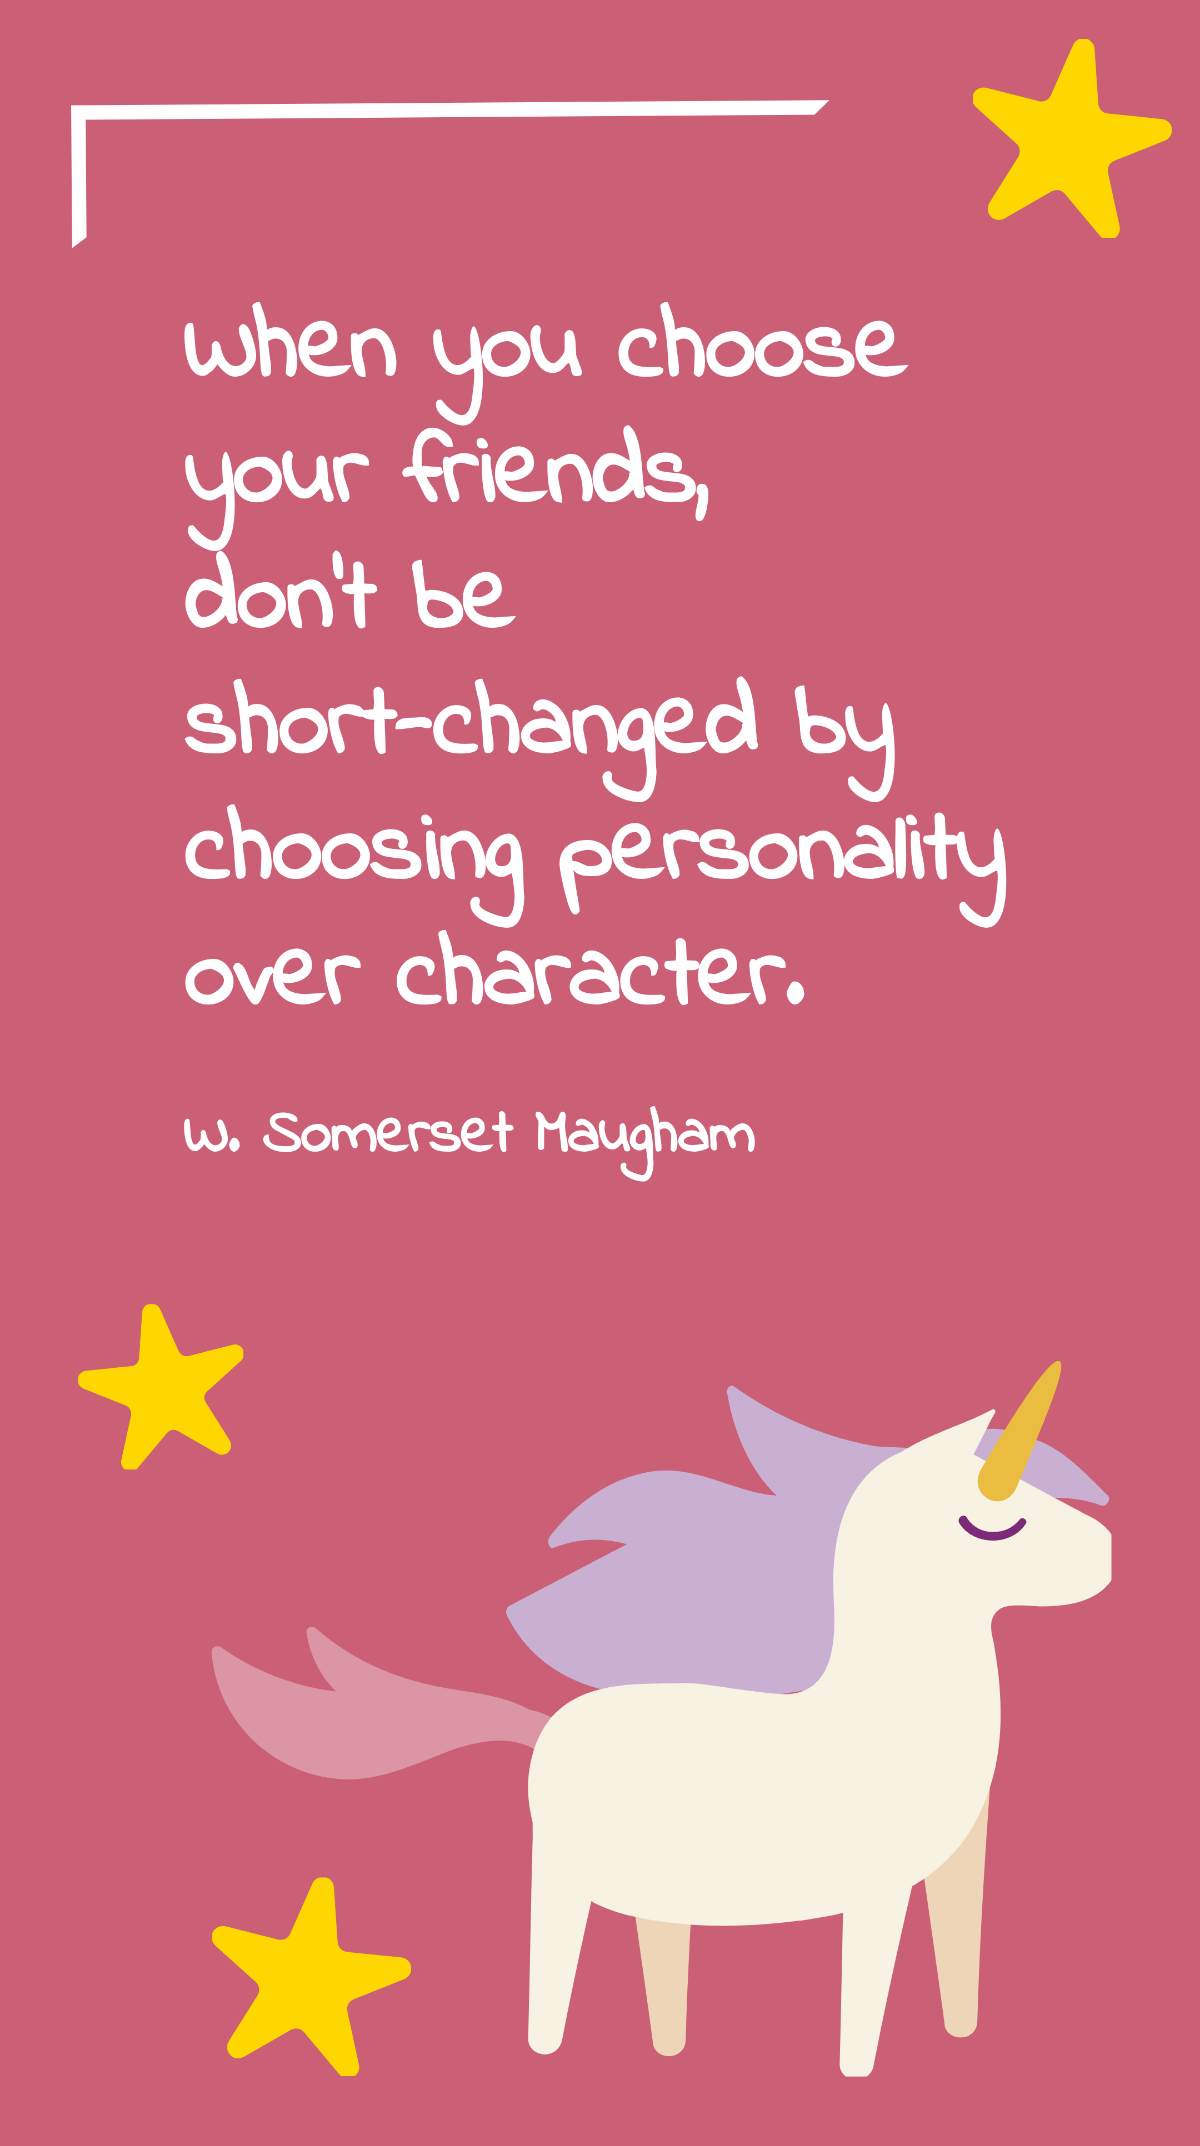 W. Somerset Maugham - When you choose your friends, don't be short-changed by choosing personality over character. Template